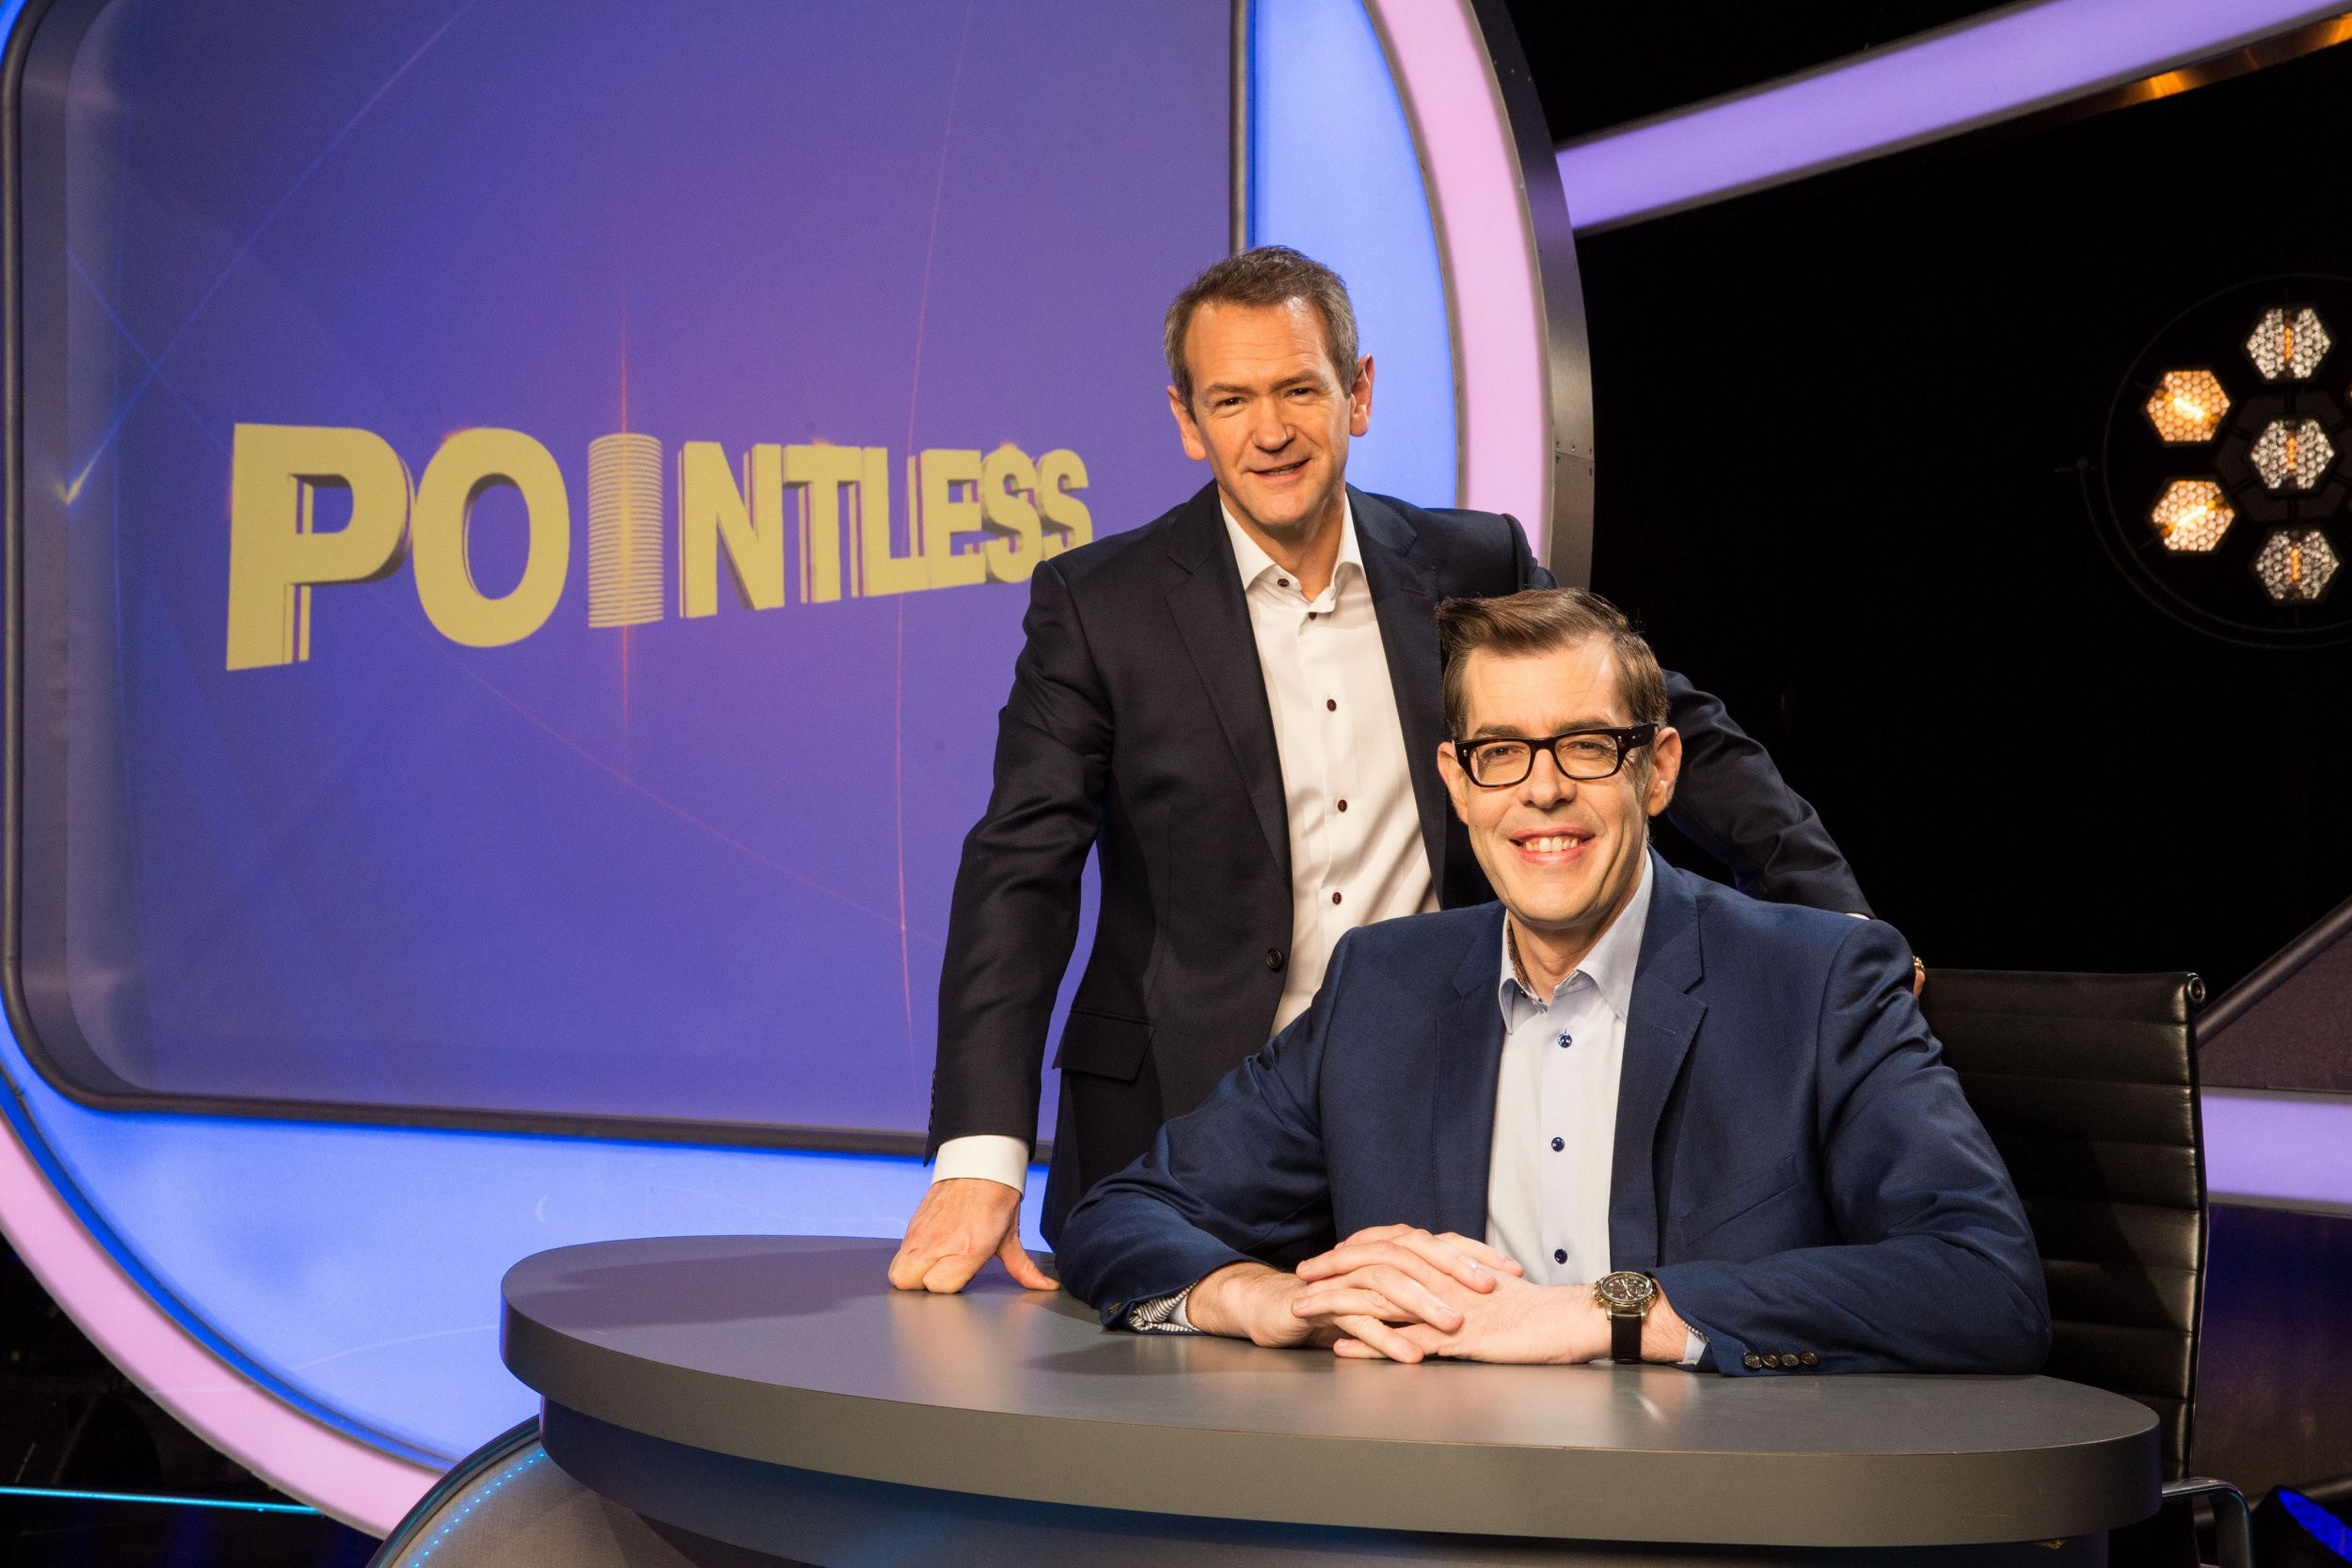 What’s the highest jackpot ever won on Pointless?